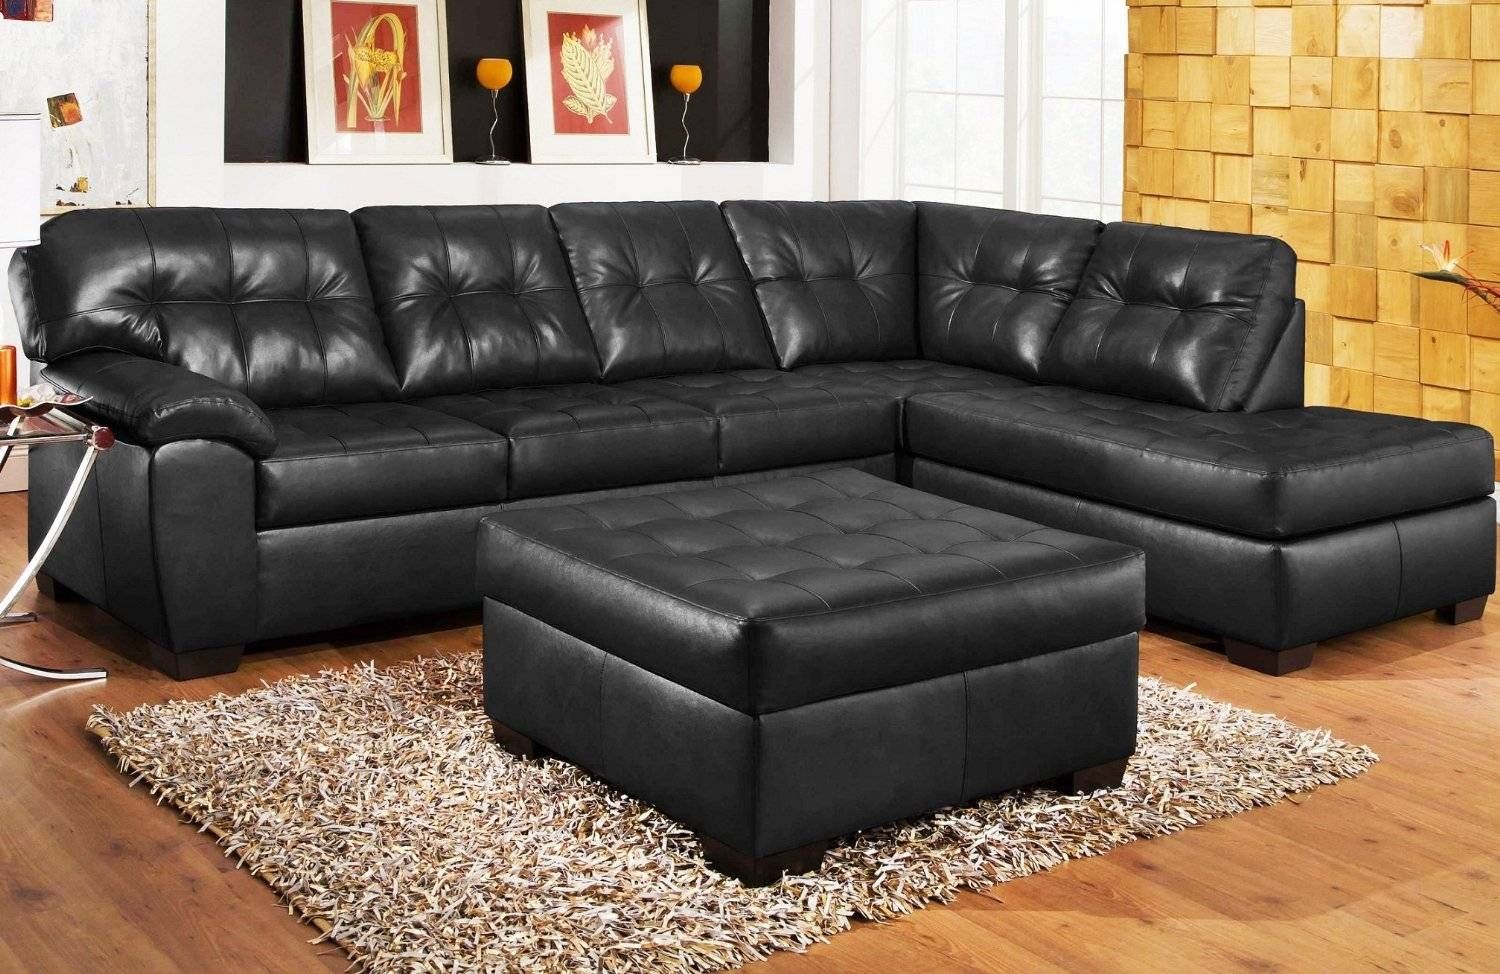 Featured Photo of 2024 Best of Black Leather Chaise Sofas